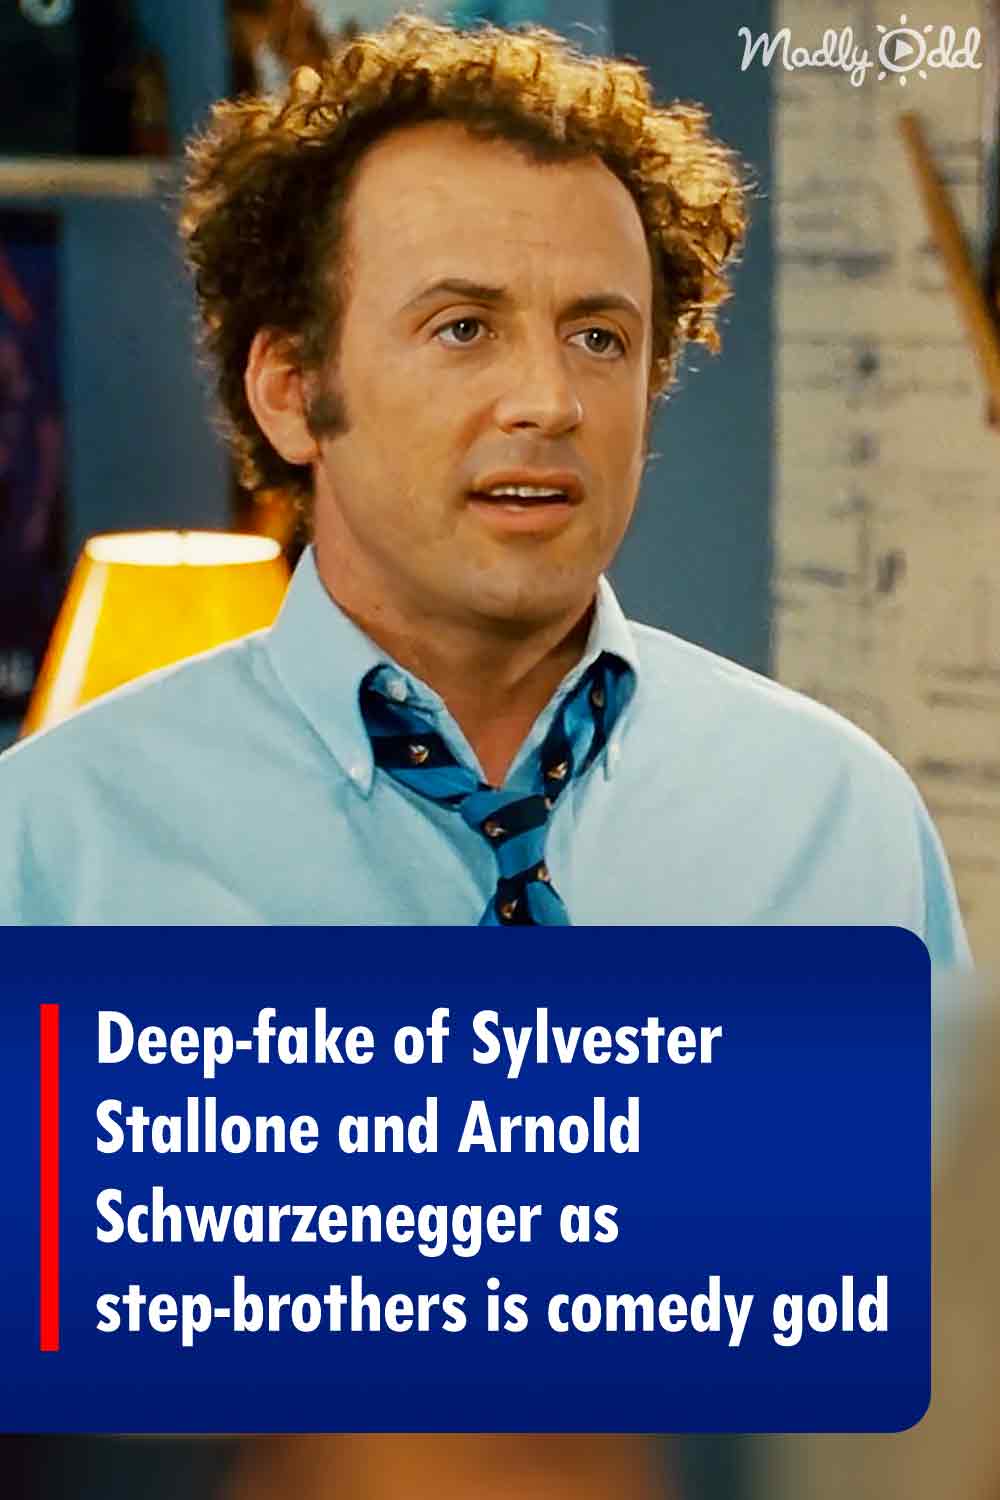 Deep-fake of Sylvester Stallone and Arnold Schwarzenegger as step-brothers is comedy gold